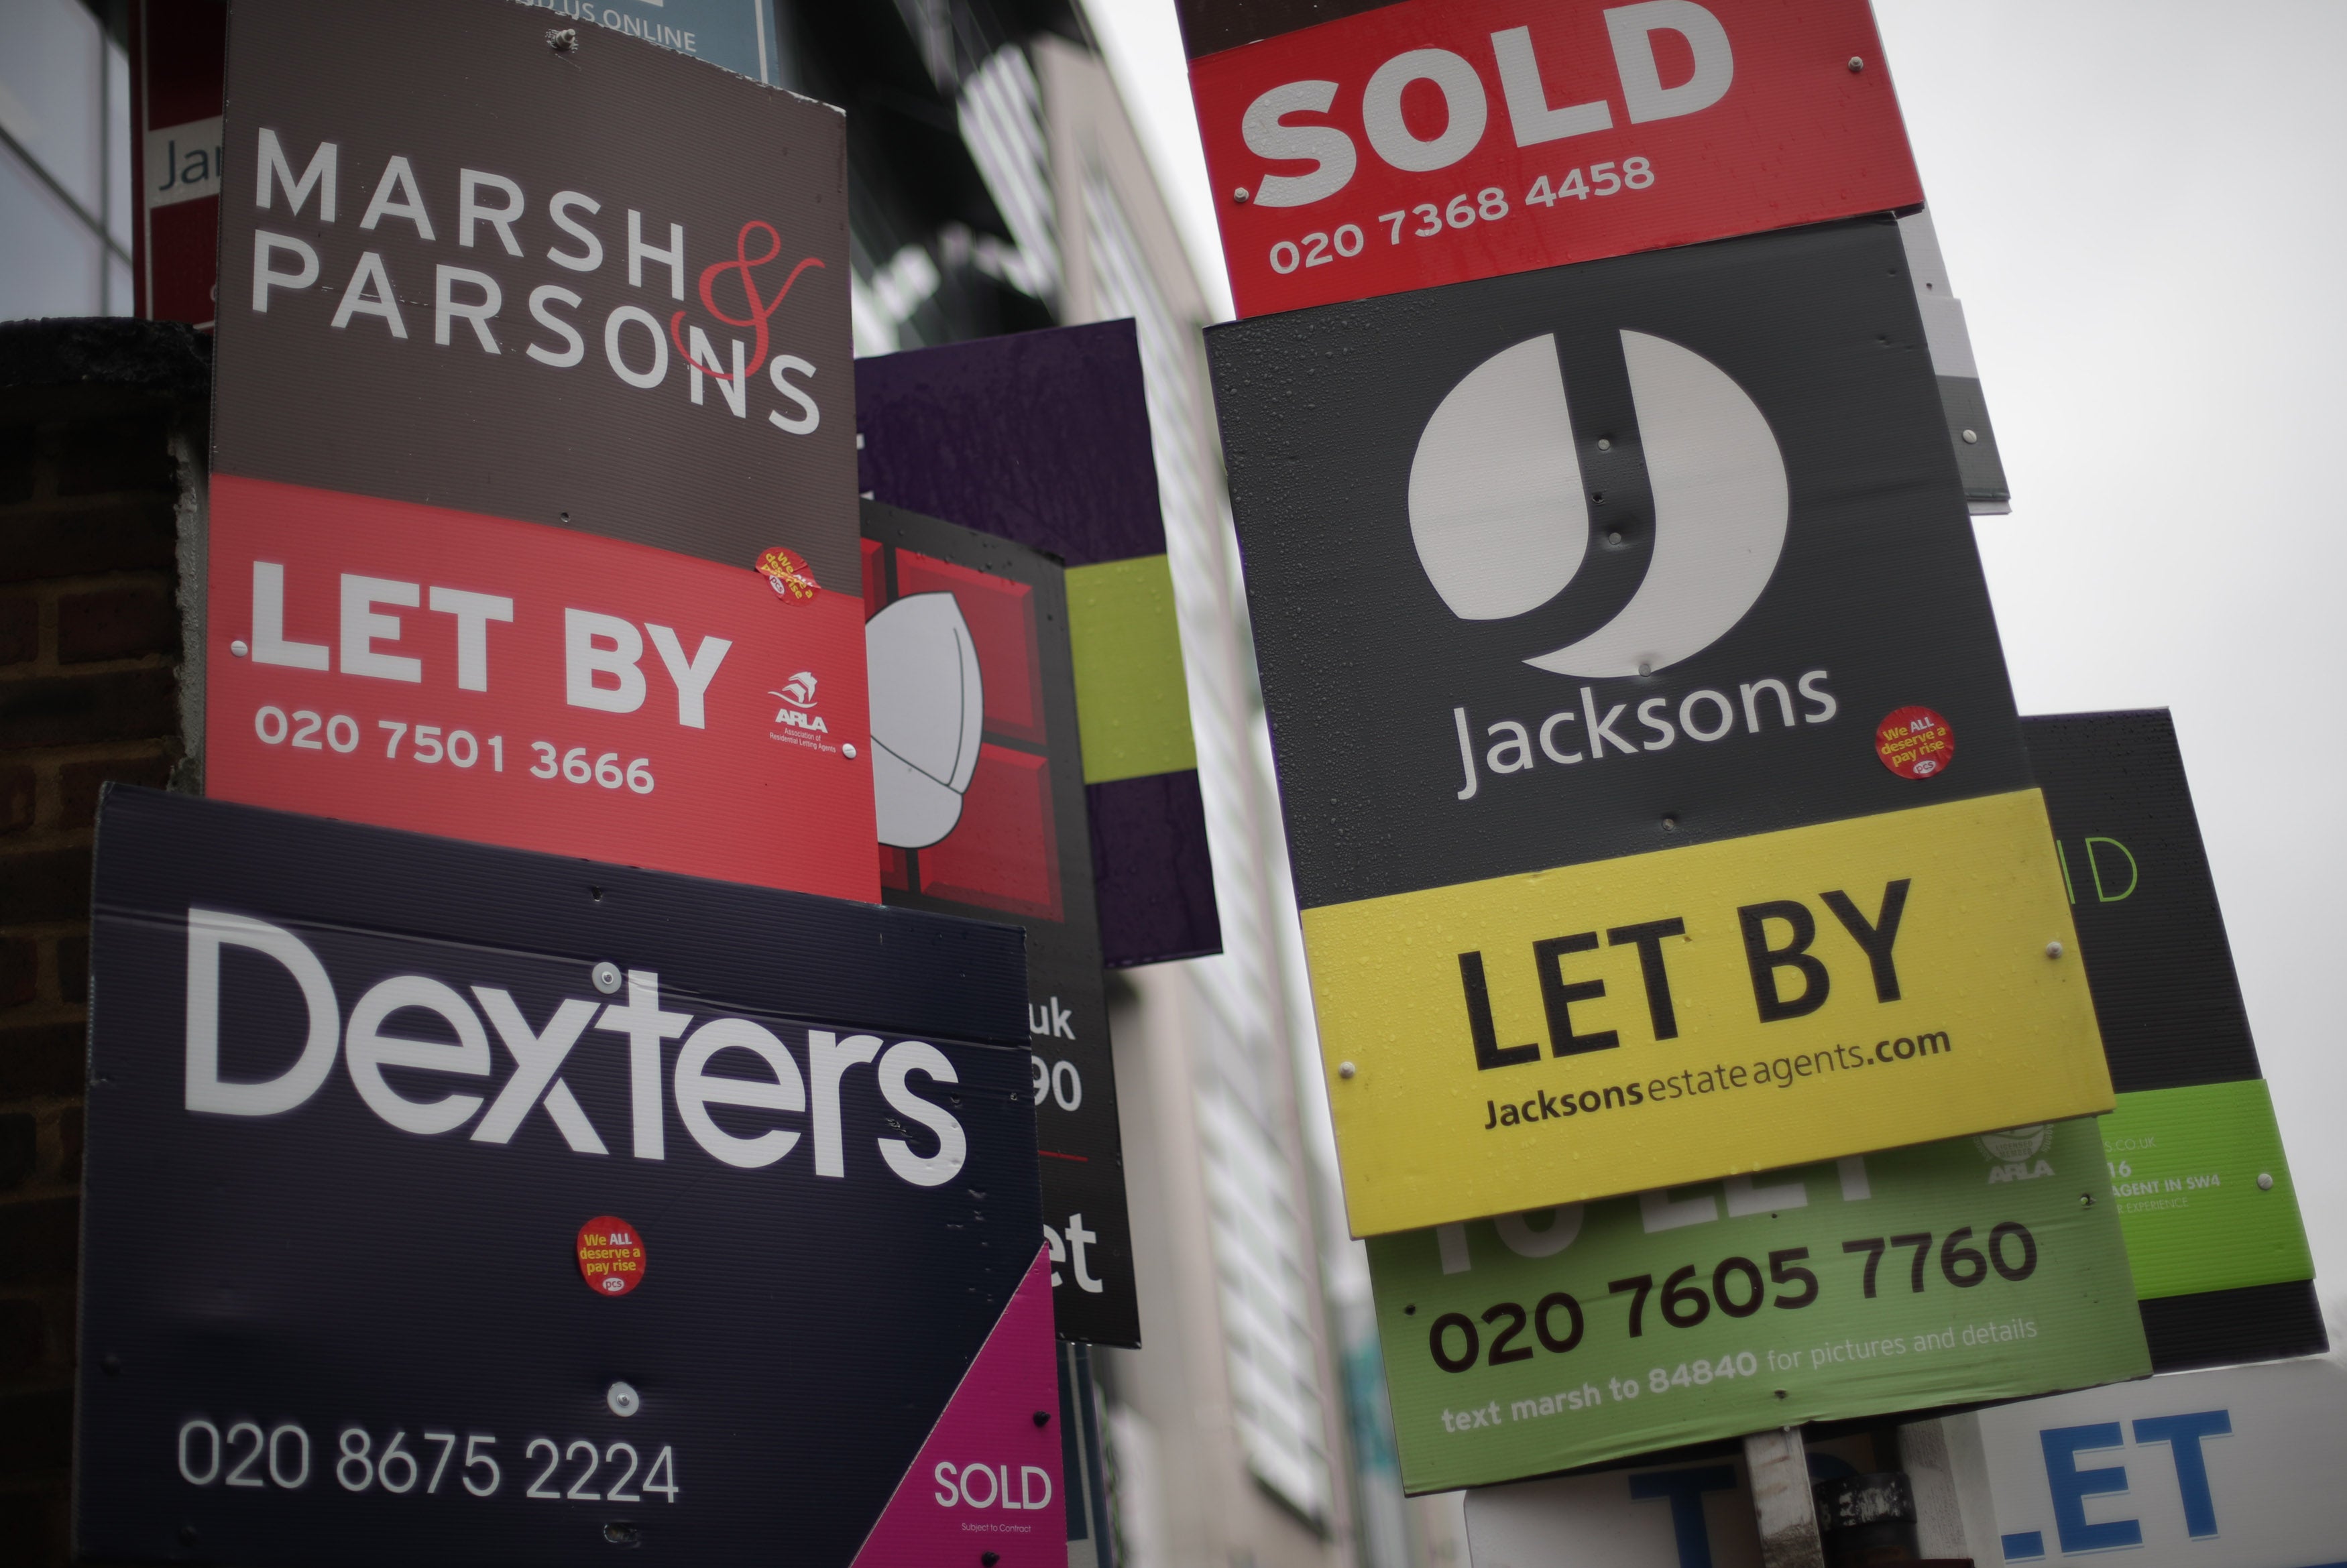 31 per cent of black and minority ethnic renters have seen an increase in their rent of more than £100 a month